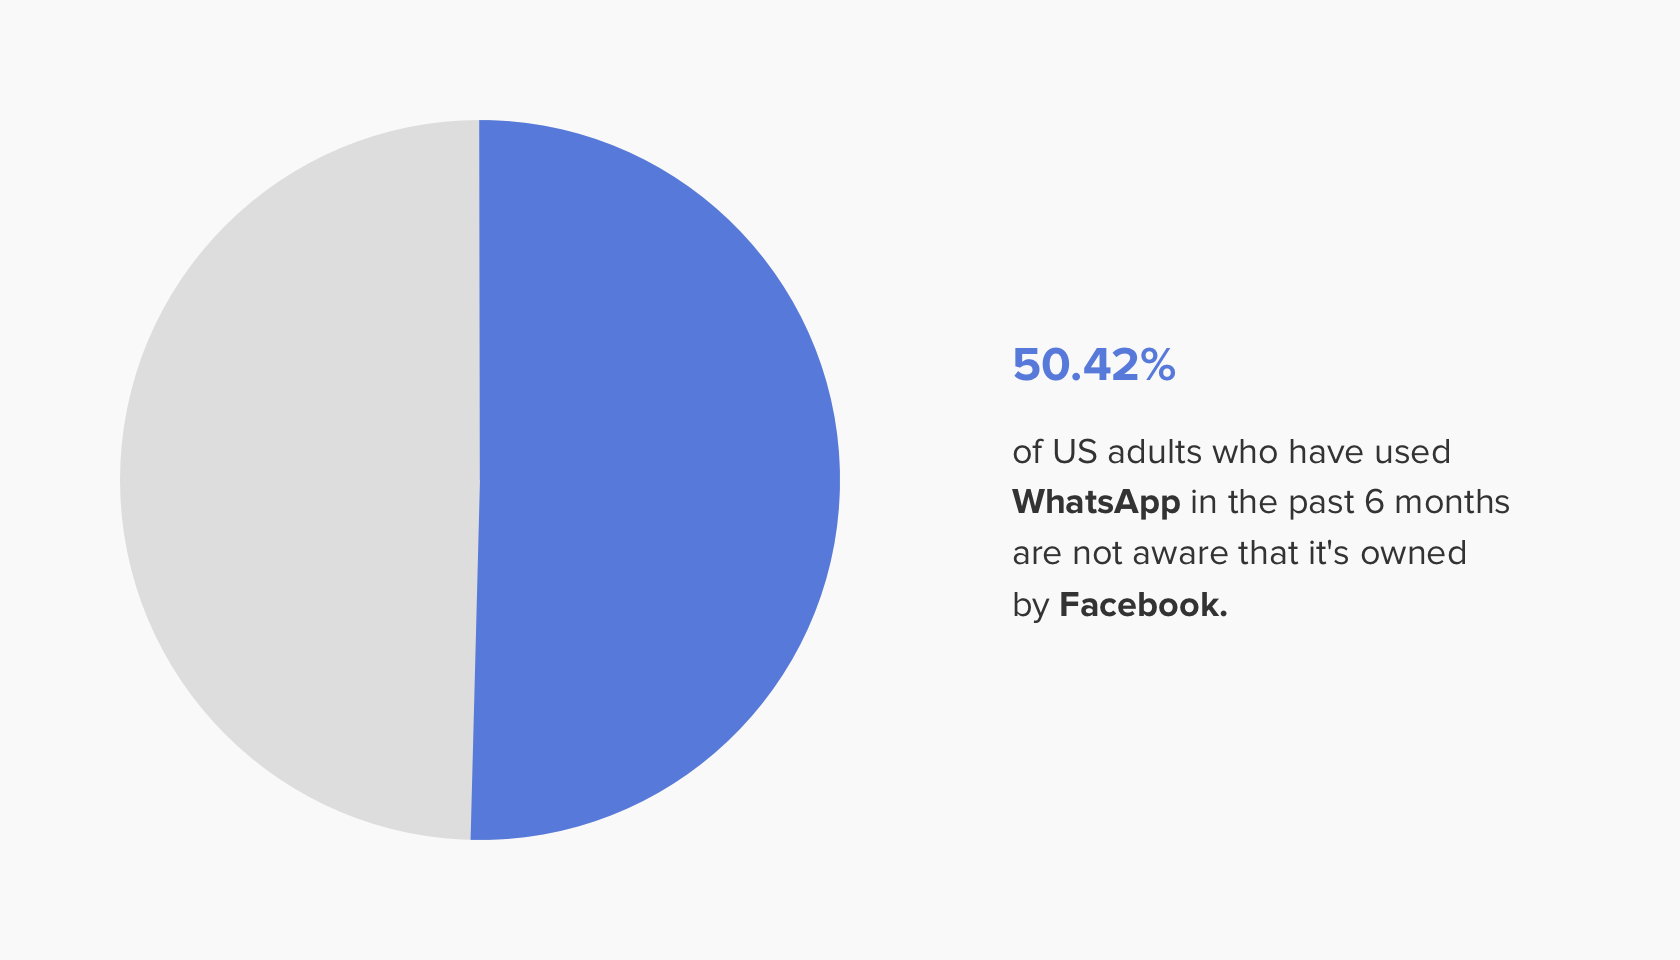 pie-chart-showing-percentage-of-people-unaware-that-Facebooks-owns-WhatsApp